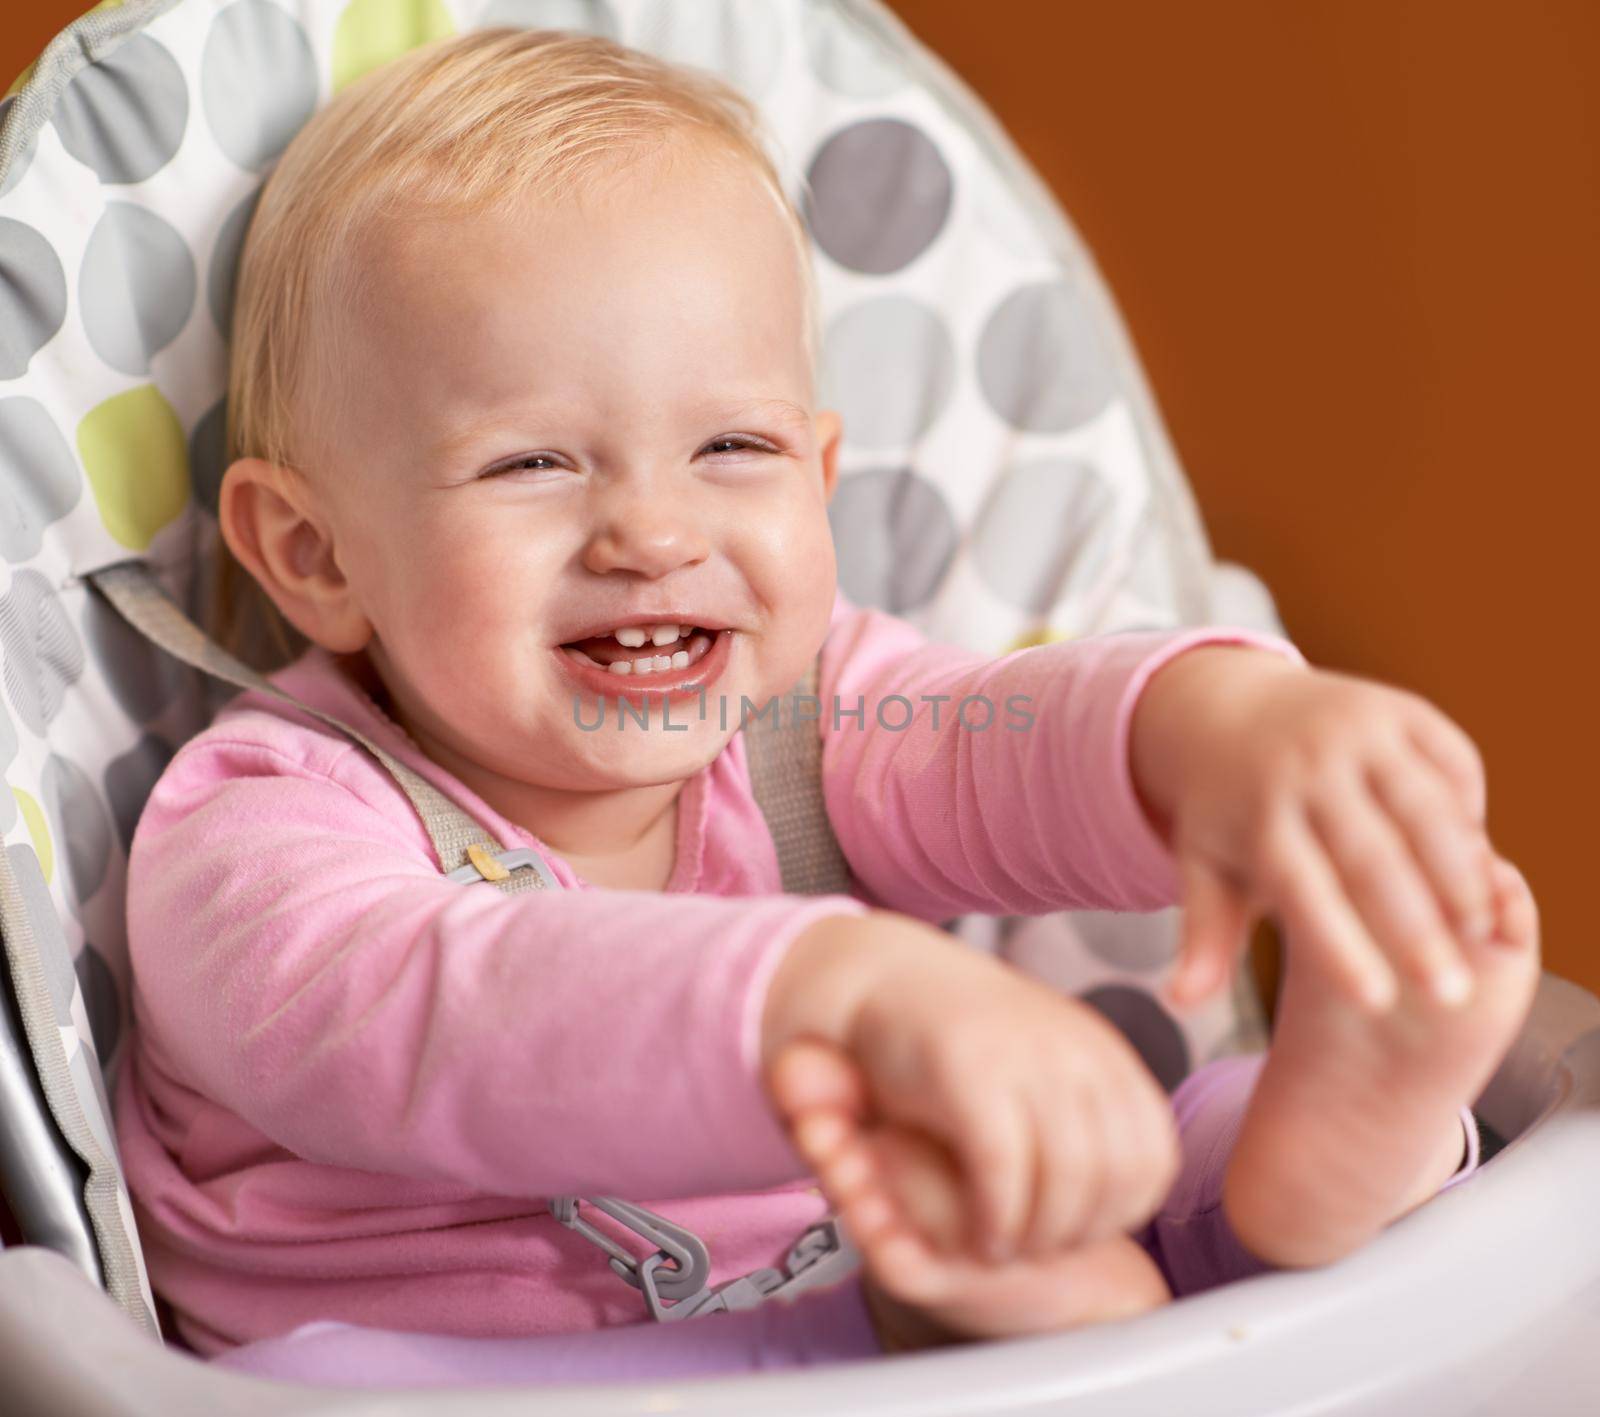 What a happy little one. Cute shot of a happy little baby in a high chair. by YuriArcurs